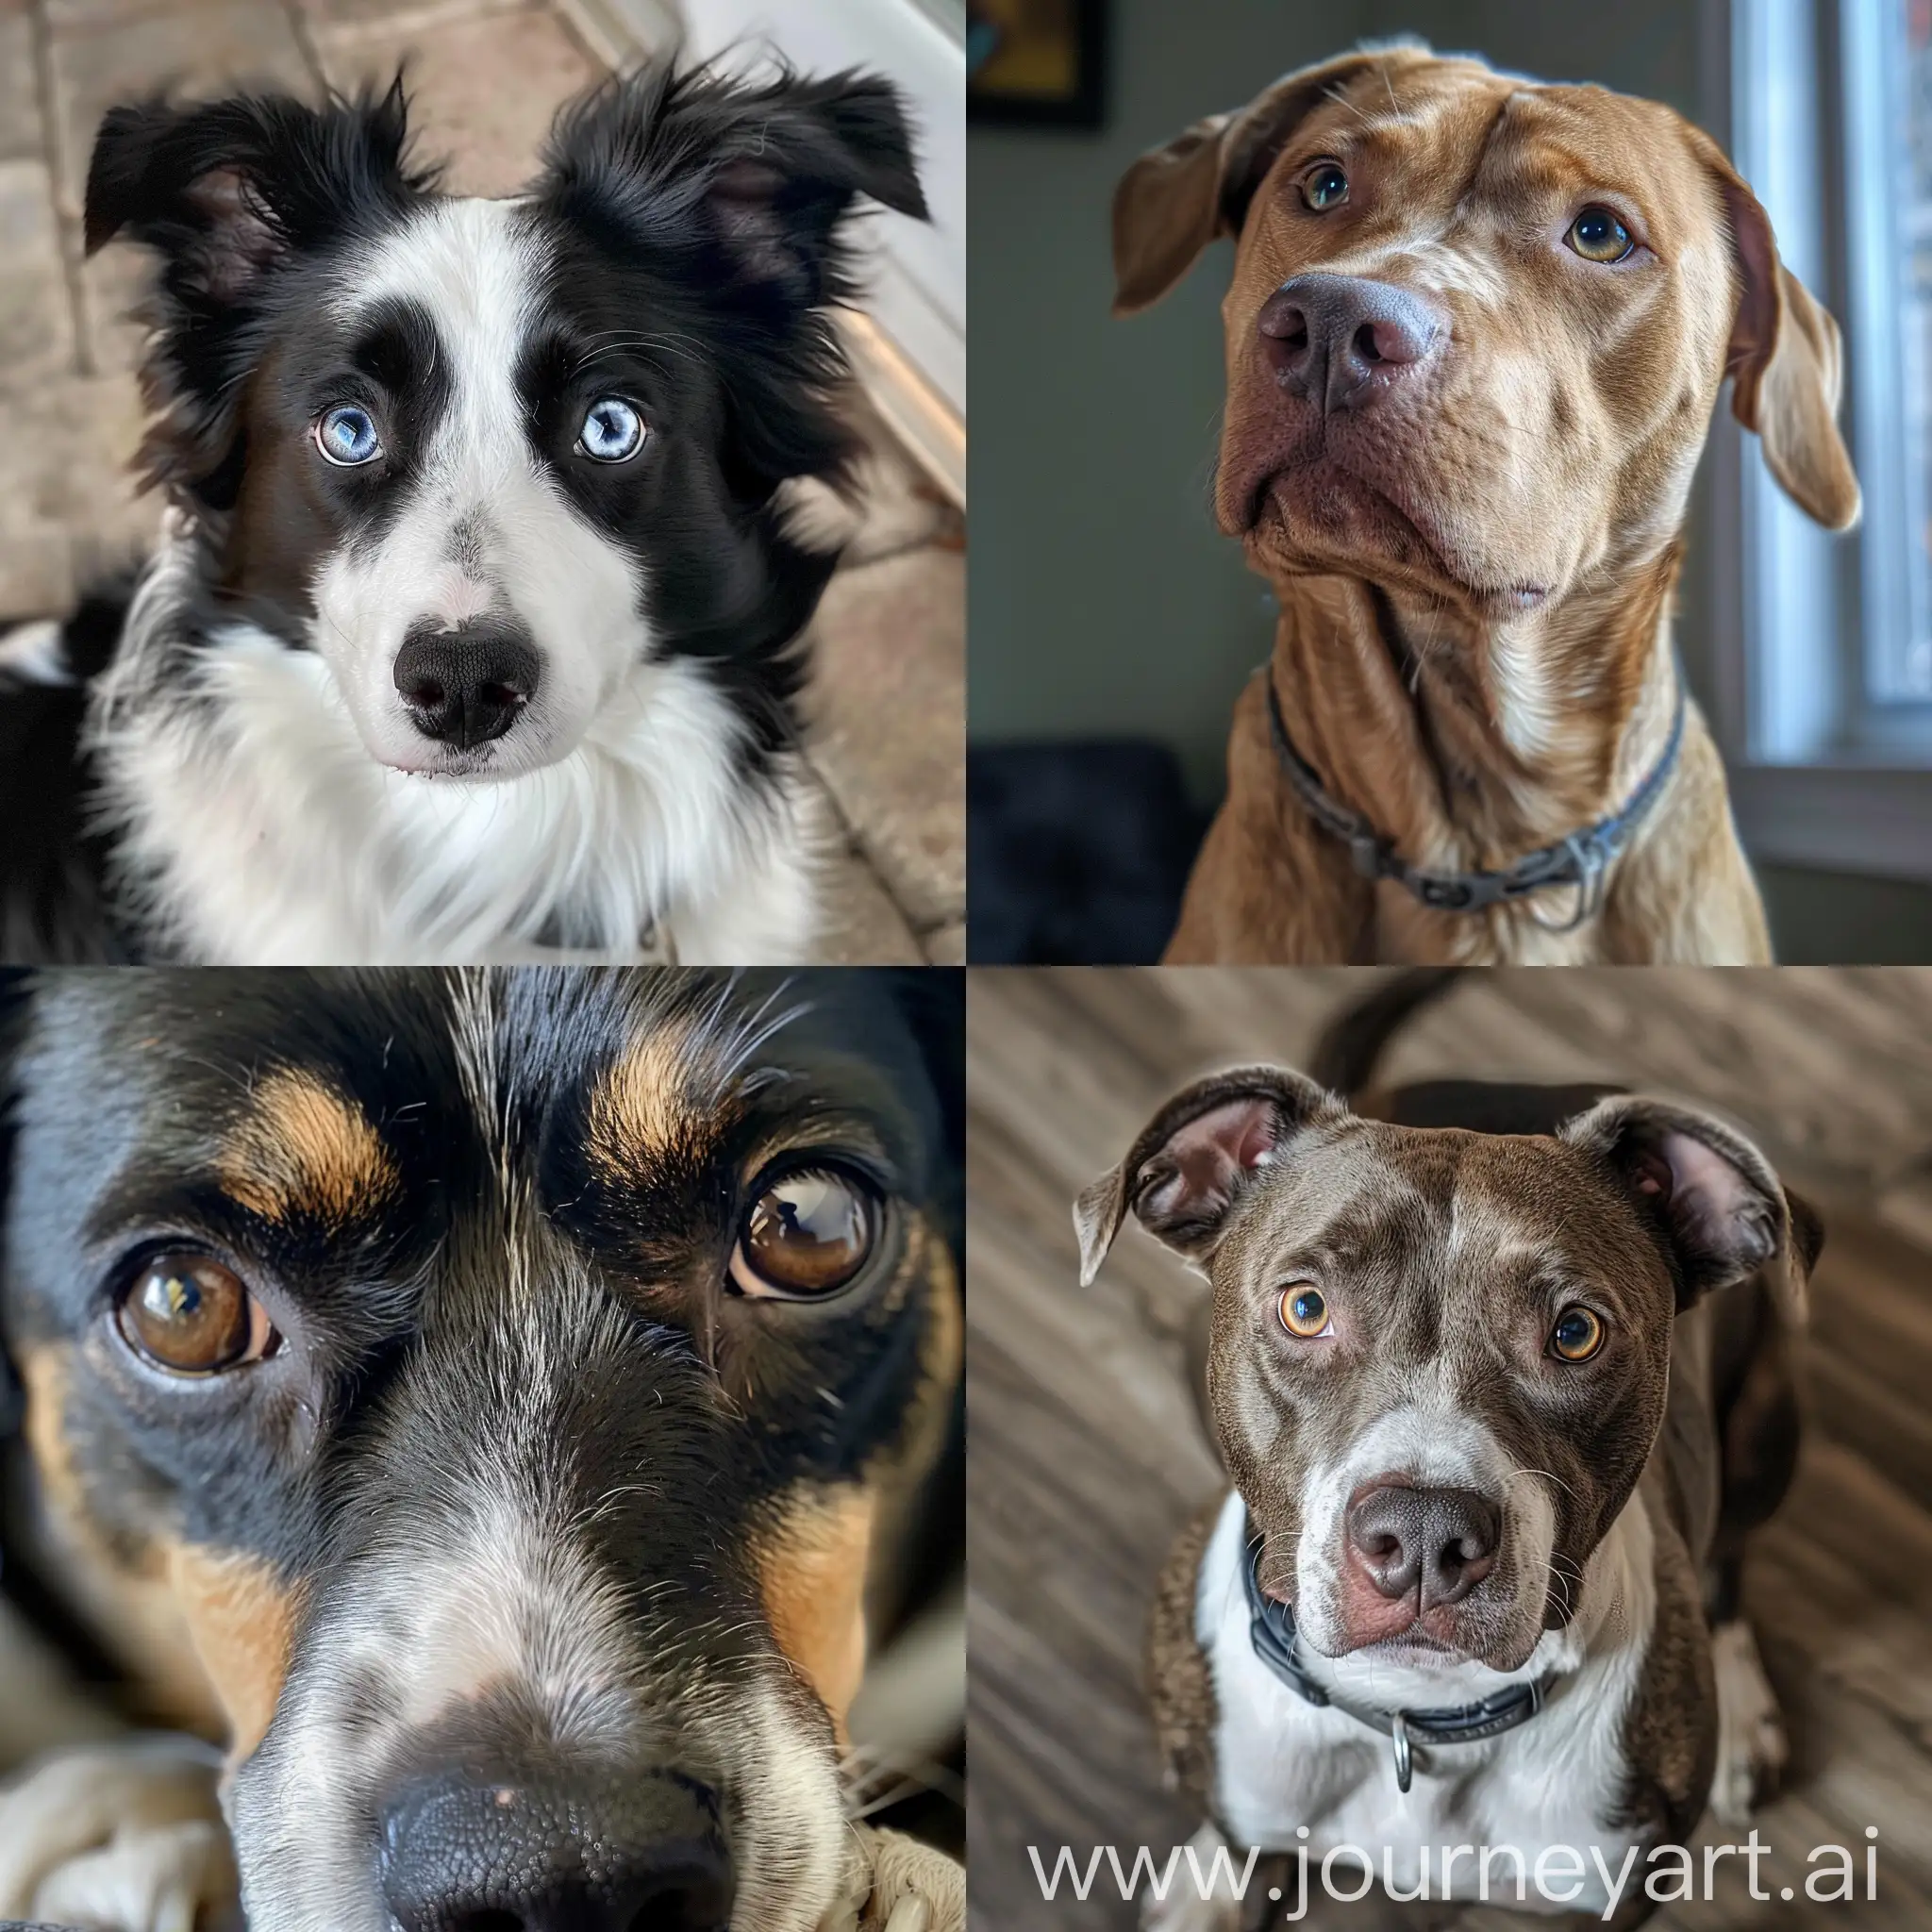 Adorable-Dog-with-Expressive-Eyes-Handsome-Canine-Portrait